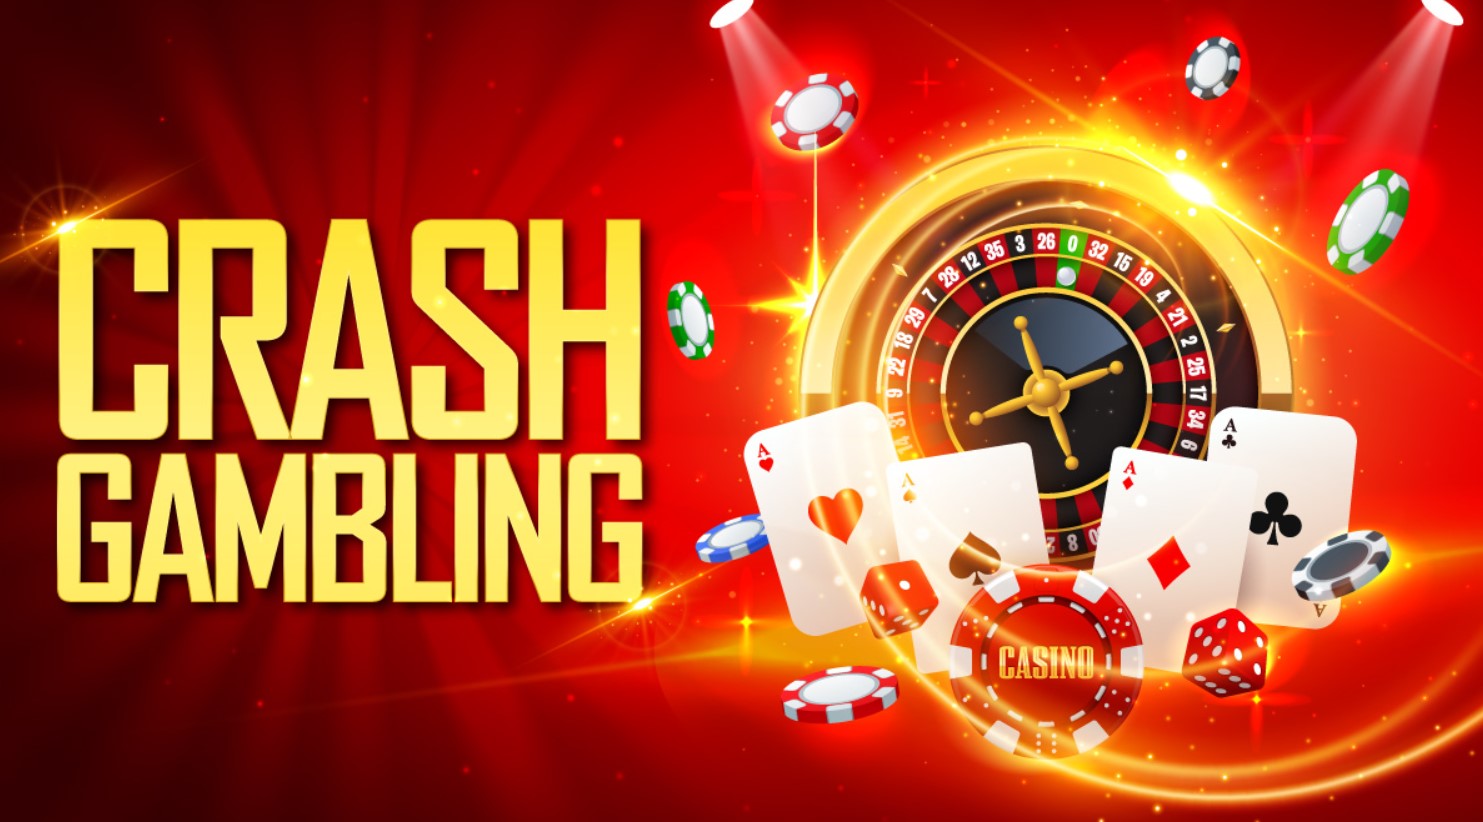 Best crash gambling games: meaning, examples